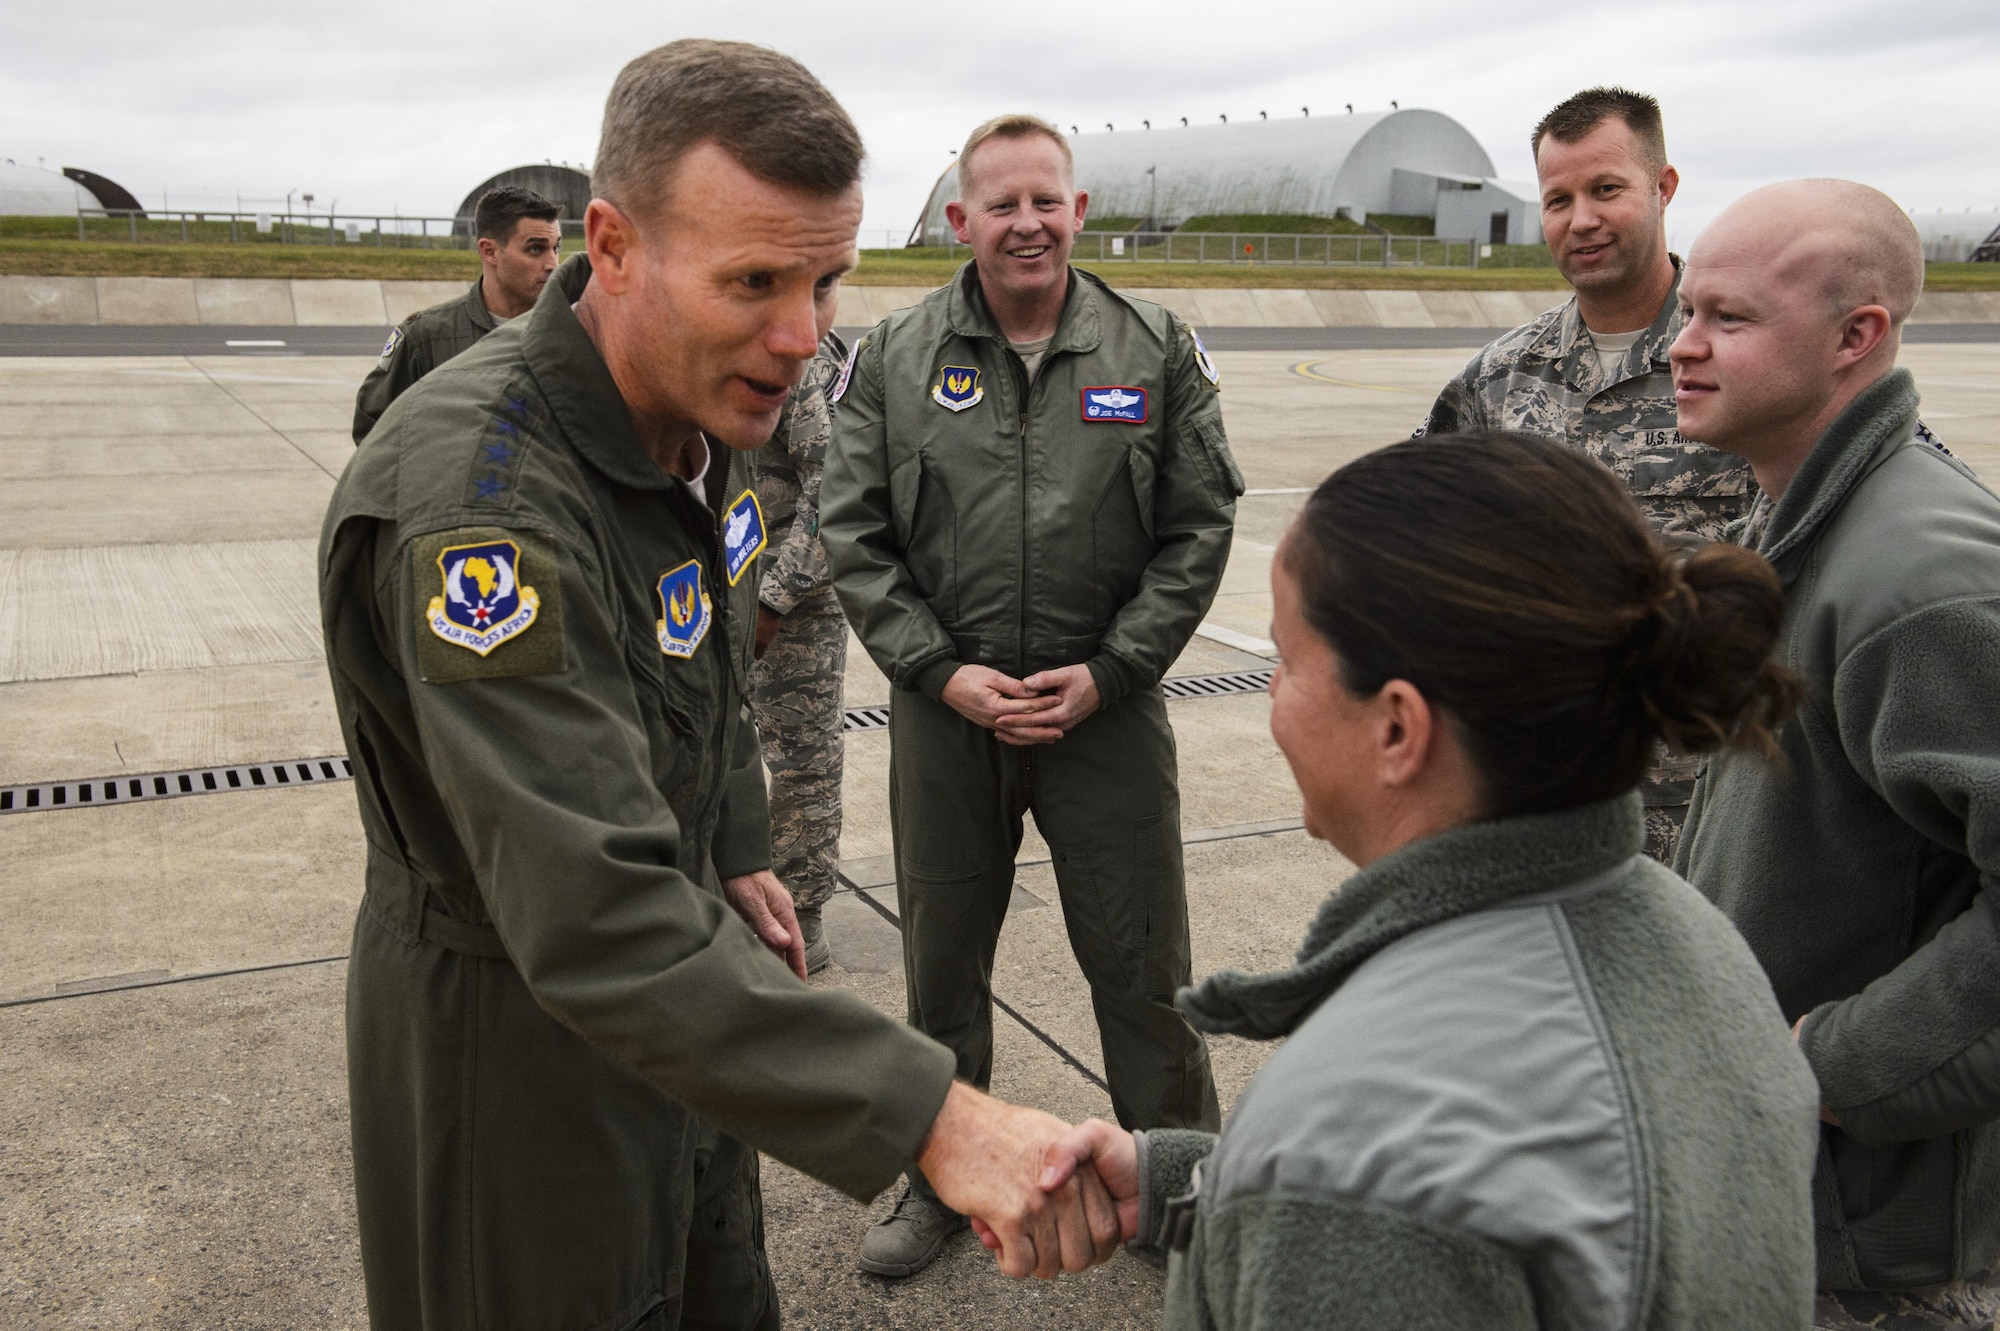 Gen. Tod D. Wolters, U.S. Air Forces in Europe and Air Forces Africa commander, coins Airmen while visiting Spangdahlem Air Base, Germany, Oct. 6, 2016. Wolters made his first visit to Spangdahlem since assuming command in August 2016, speaking to Airmen on the importance and uniqueness of their mission priorities. (U.S. Air Force photo by Senior Airman Joshua R. M. Dewberry)